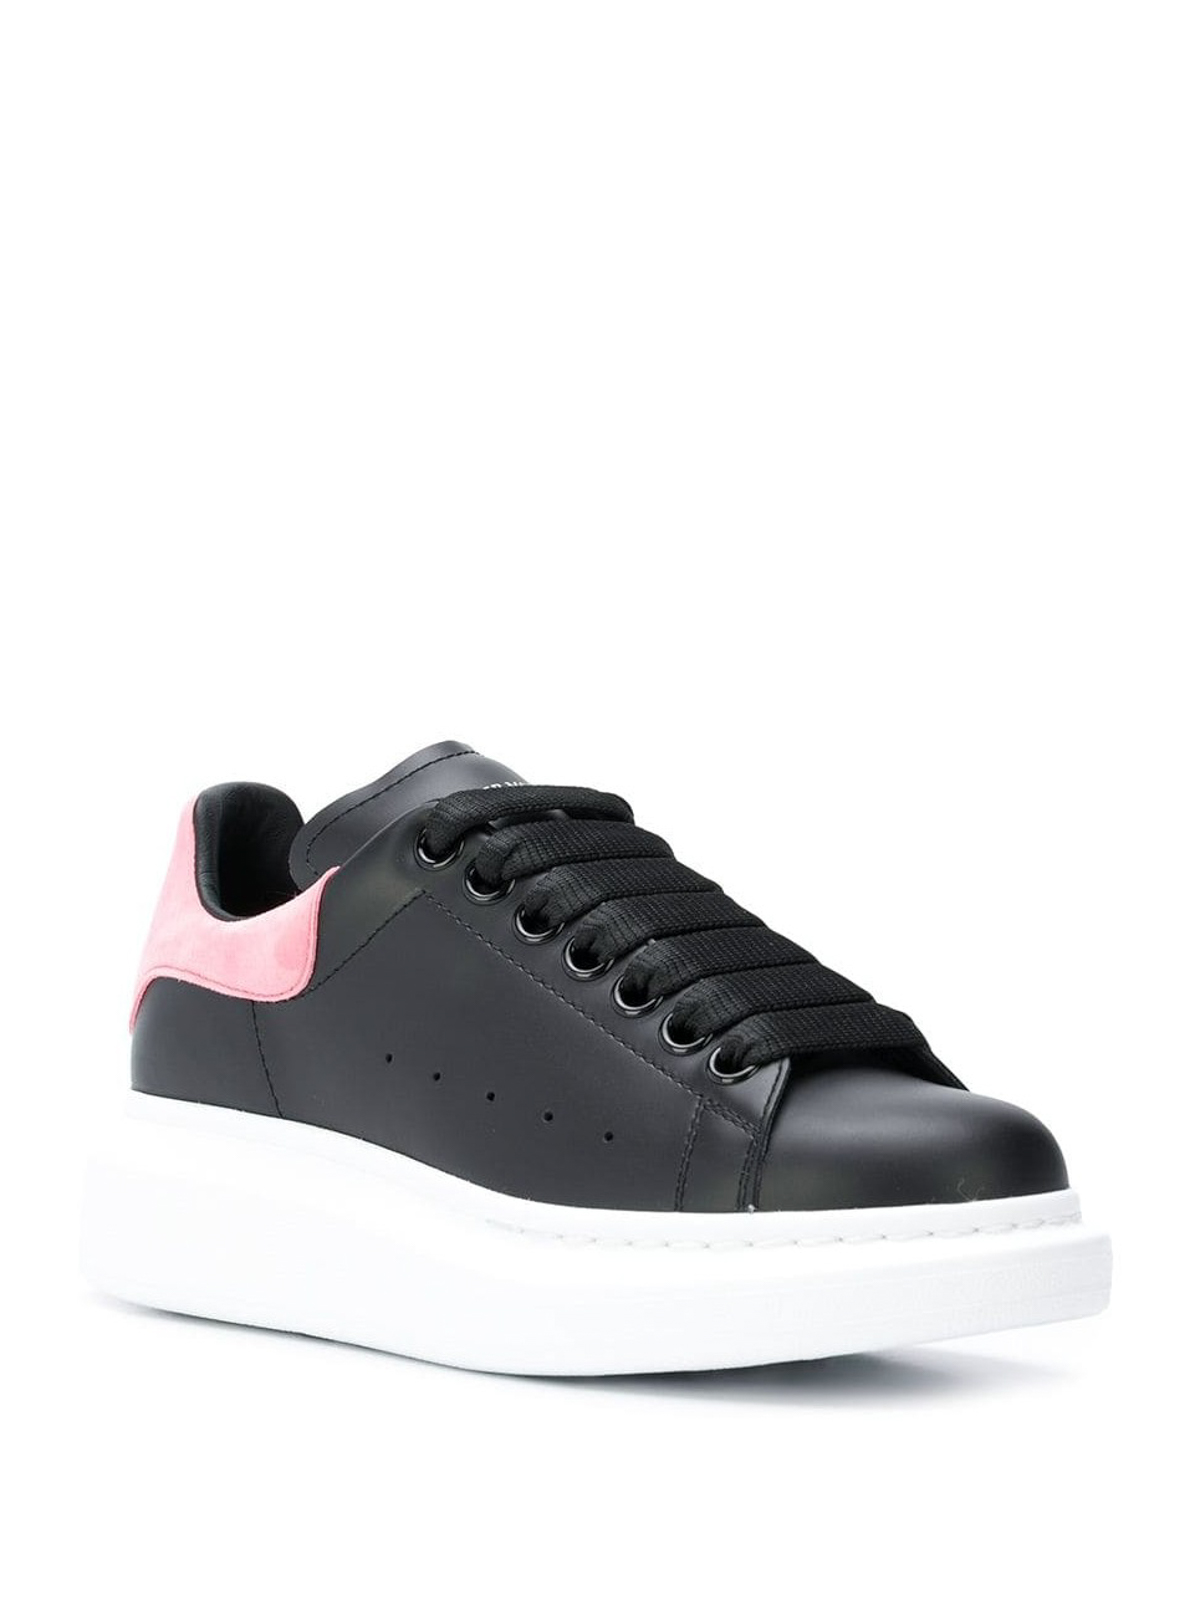 Oversize black leather sneakers 